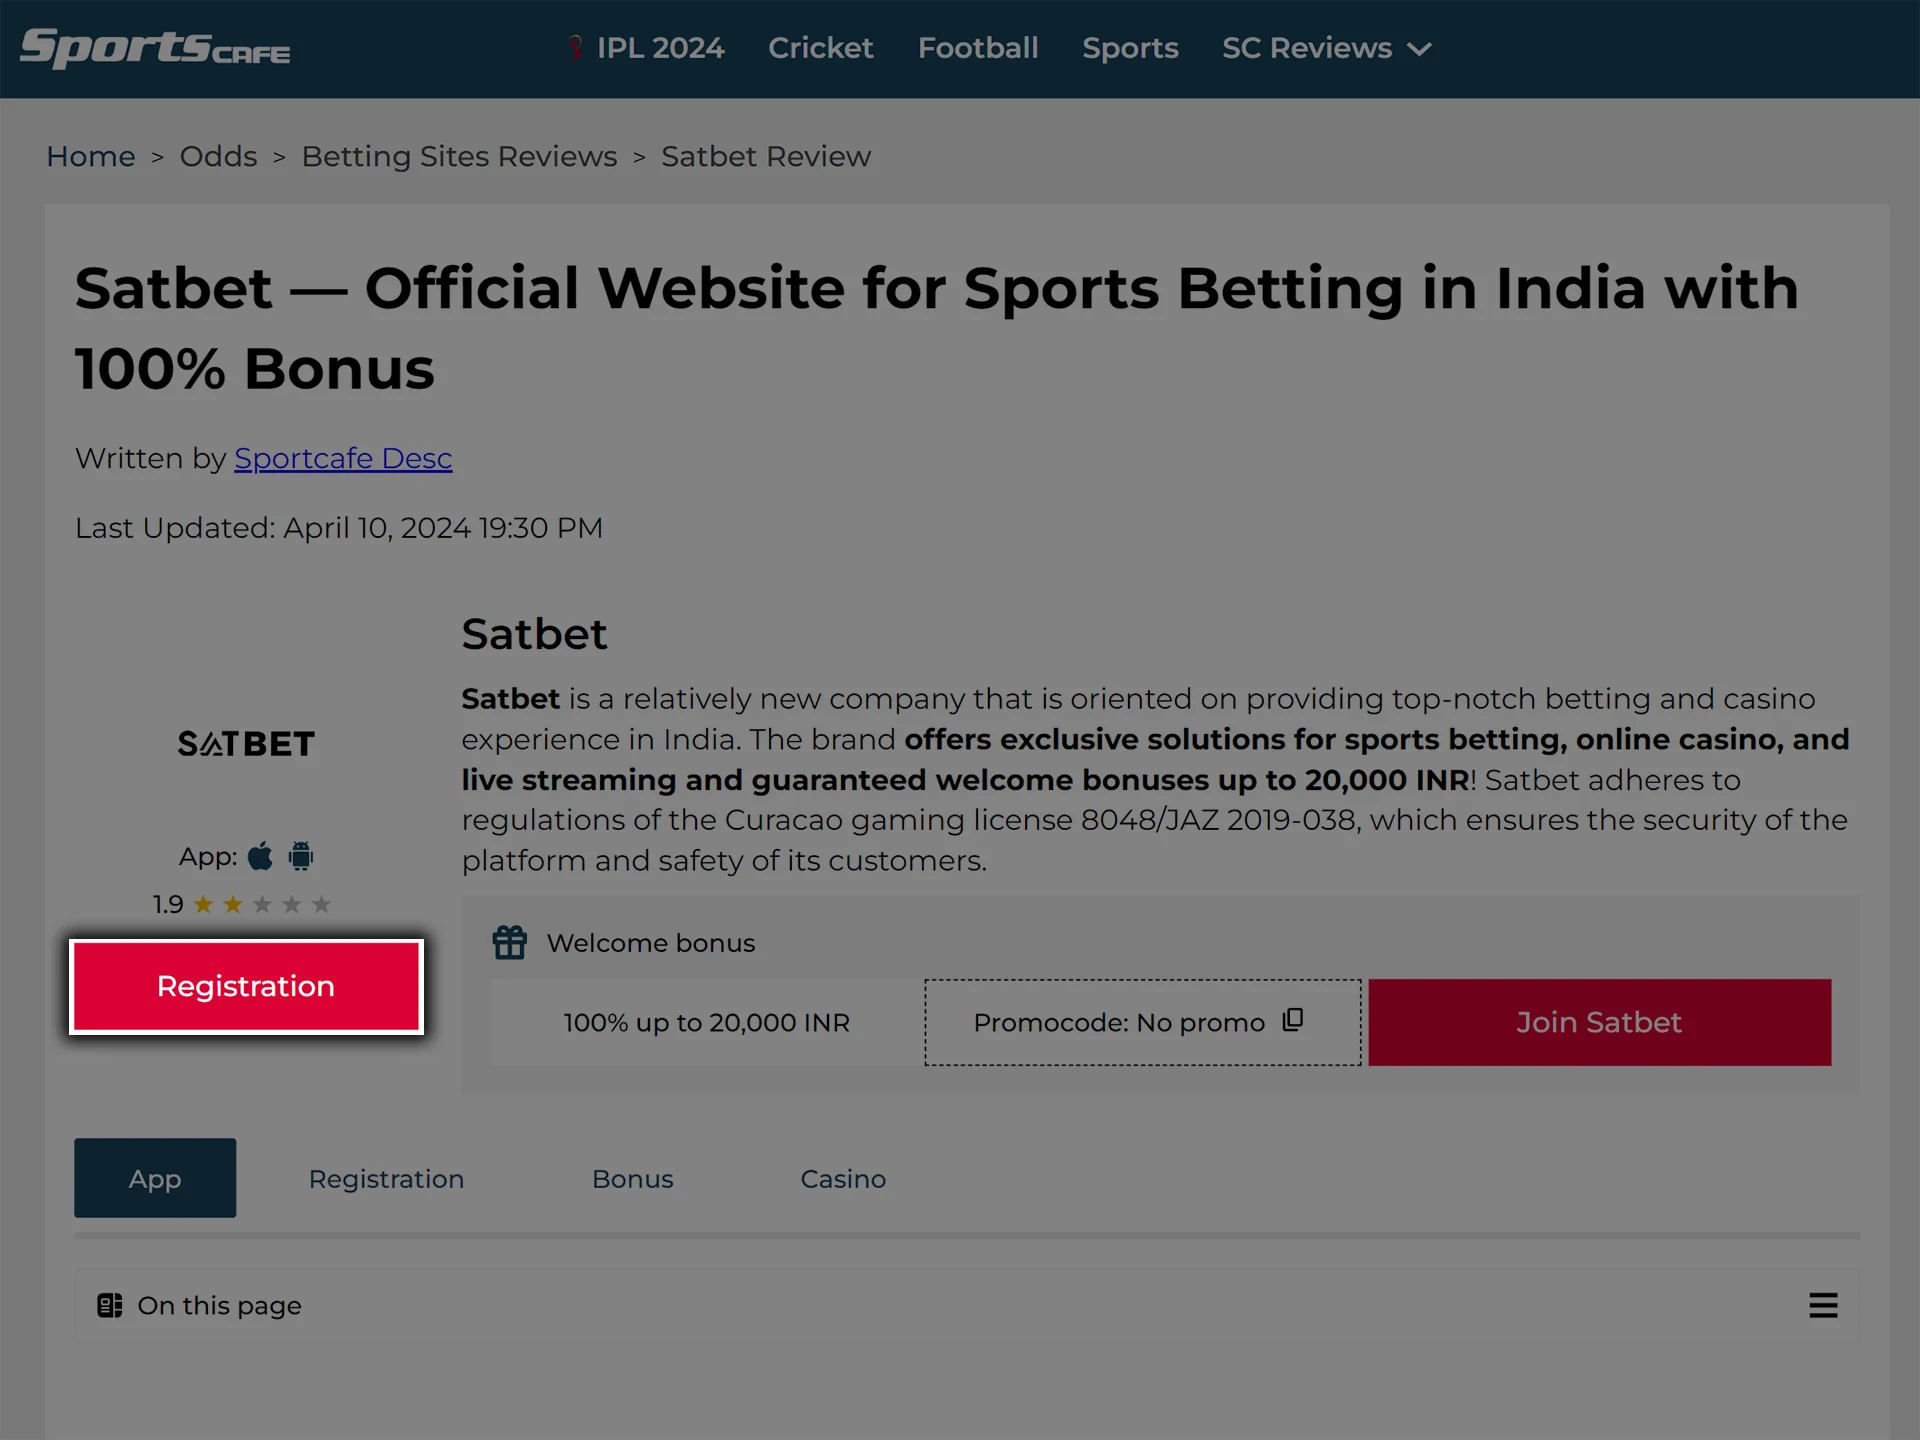 Click on the link to open the Satbet website.